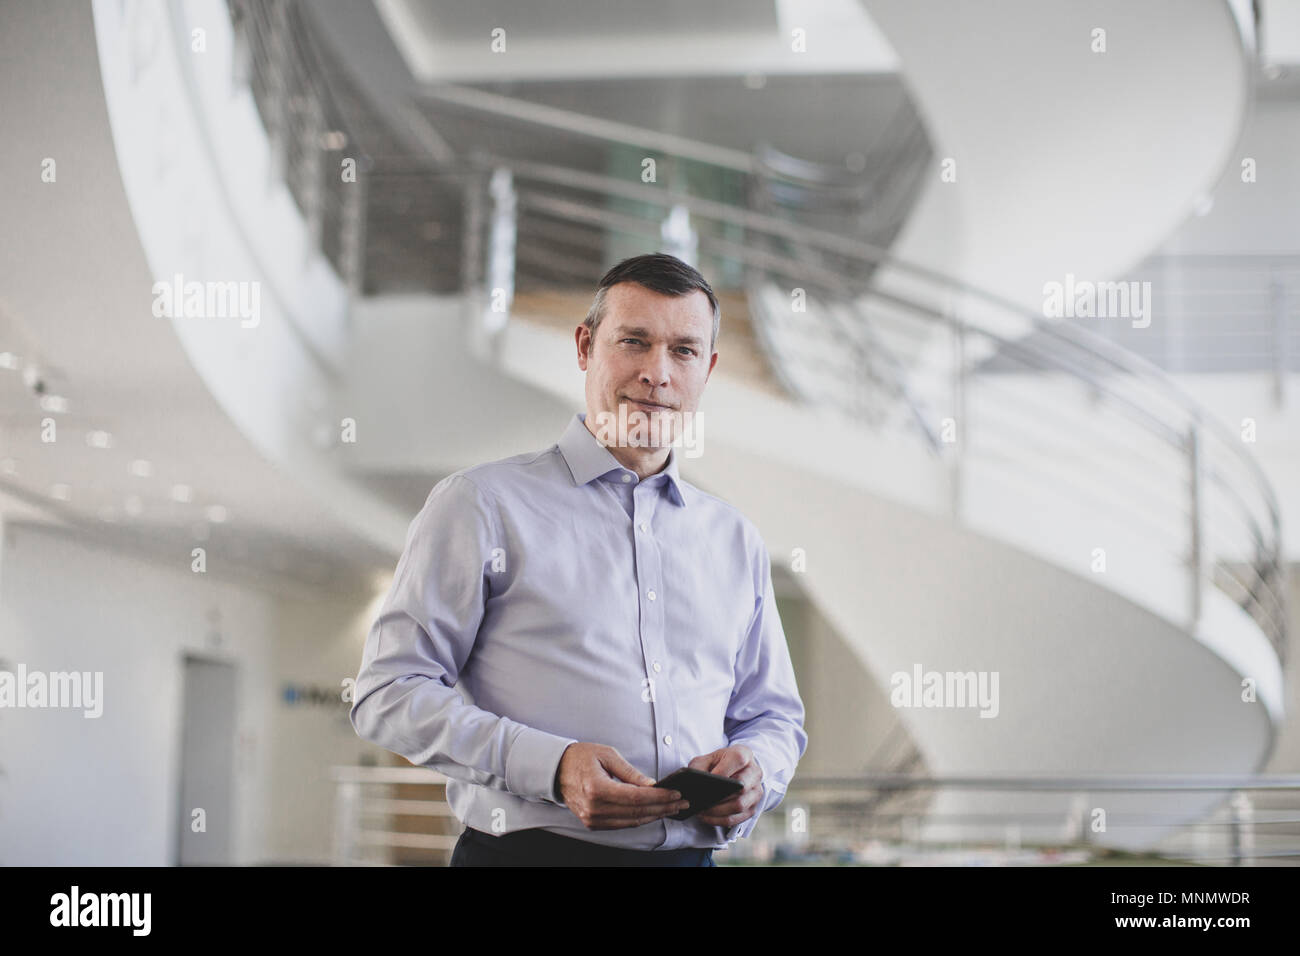 Portrait of businessman in modern office space Banque D'Images